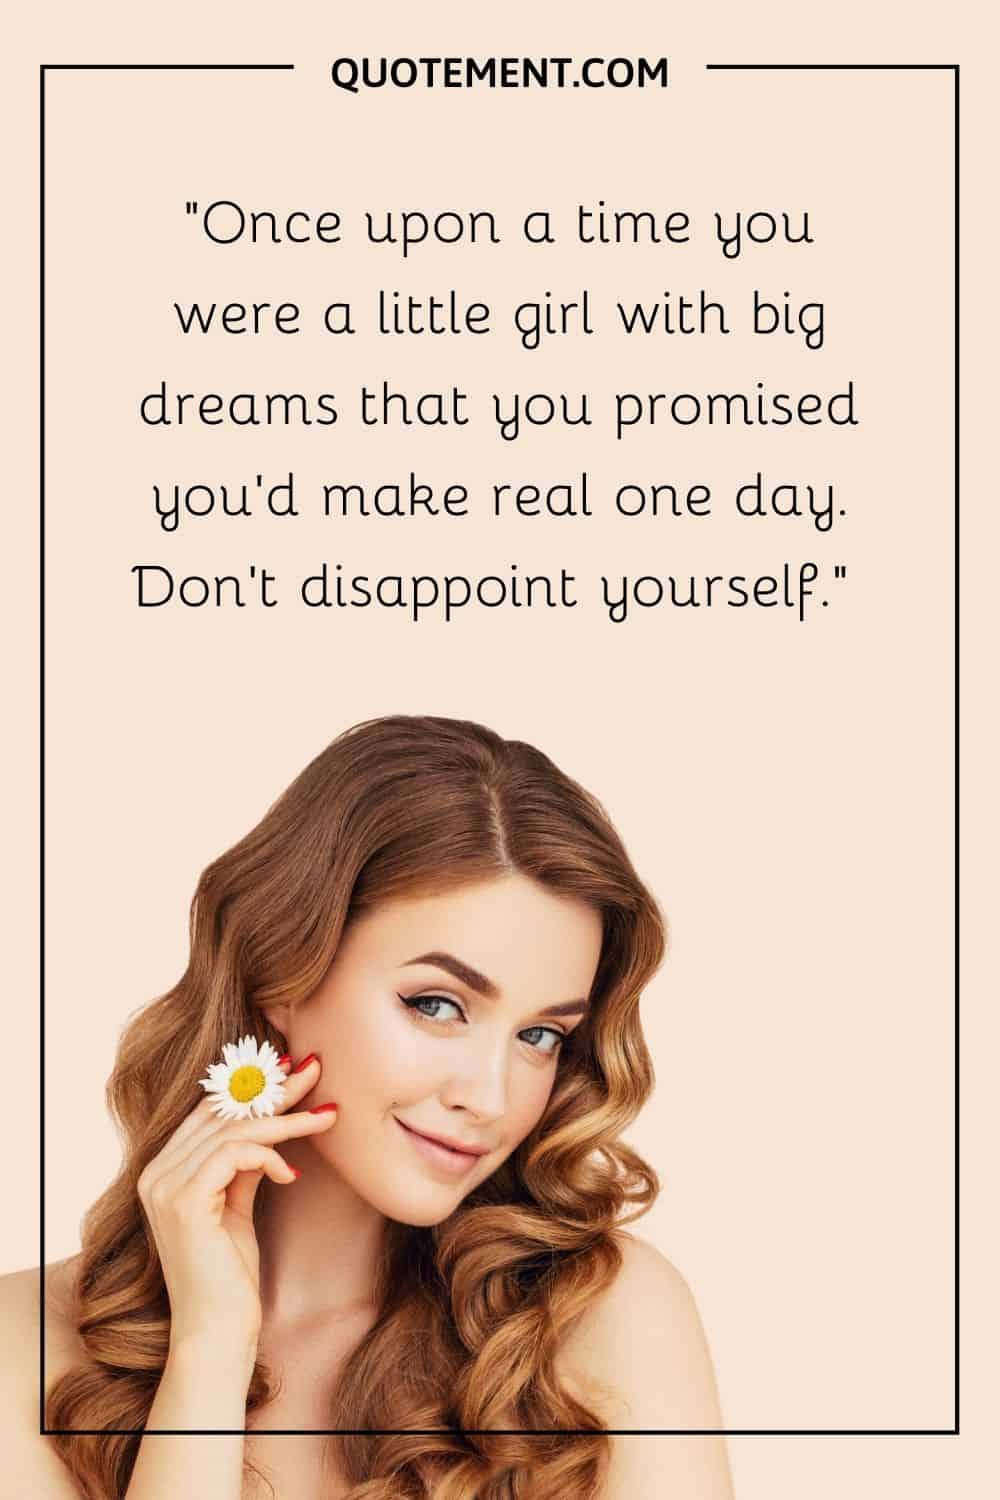 Don't disappoint yourself.